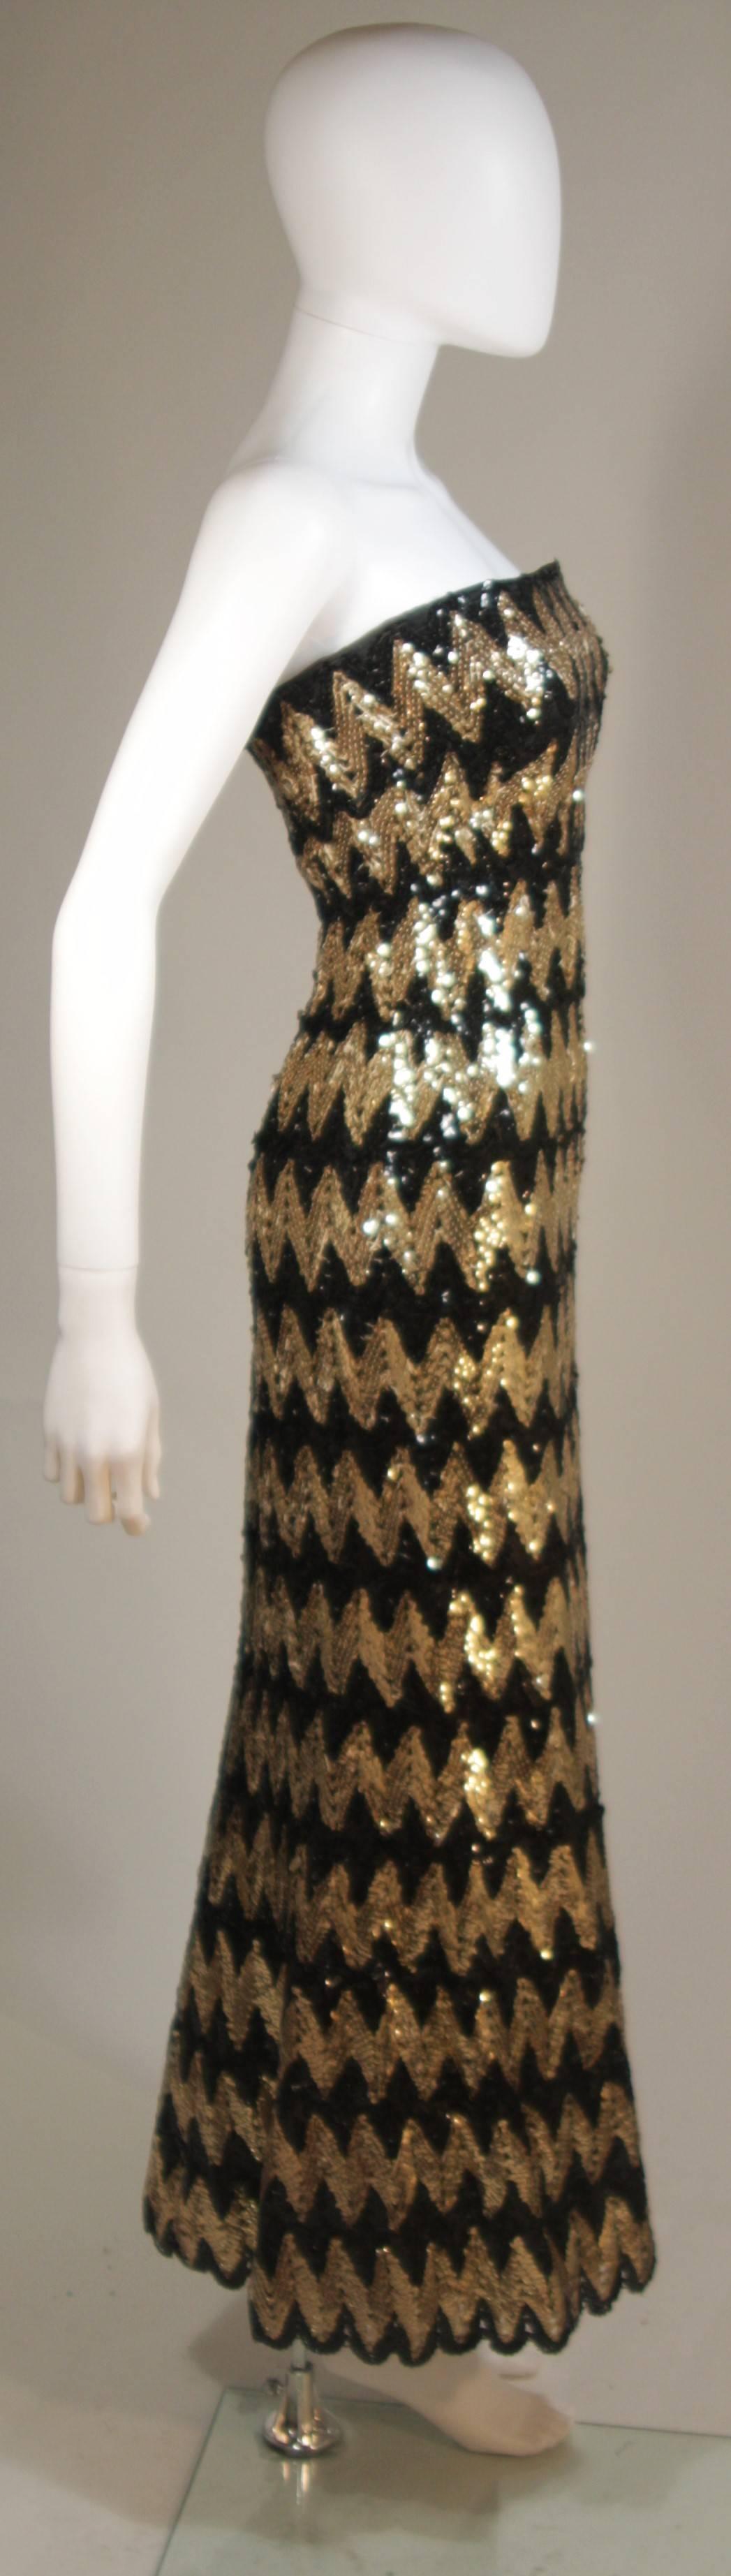 SCAASI Strapless Black and Gold Knit Sequin Gown Size 2-4 For Sale 2